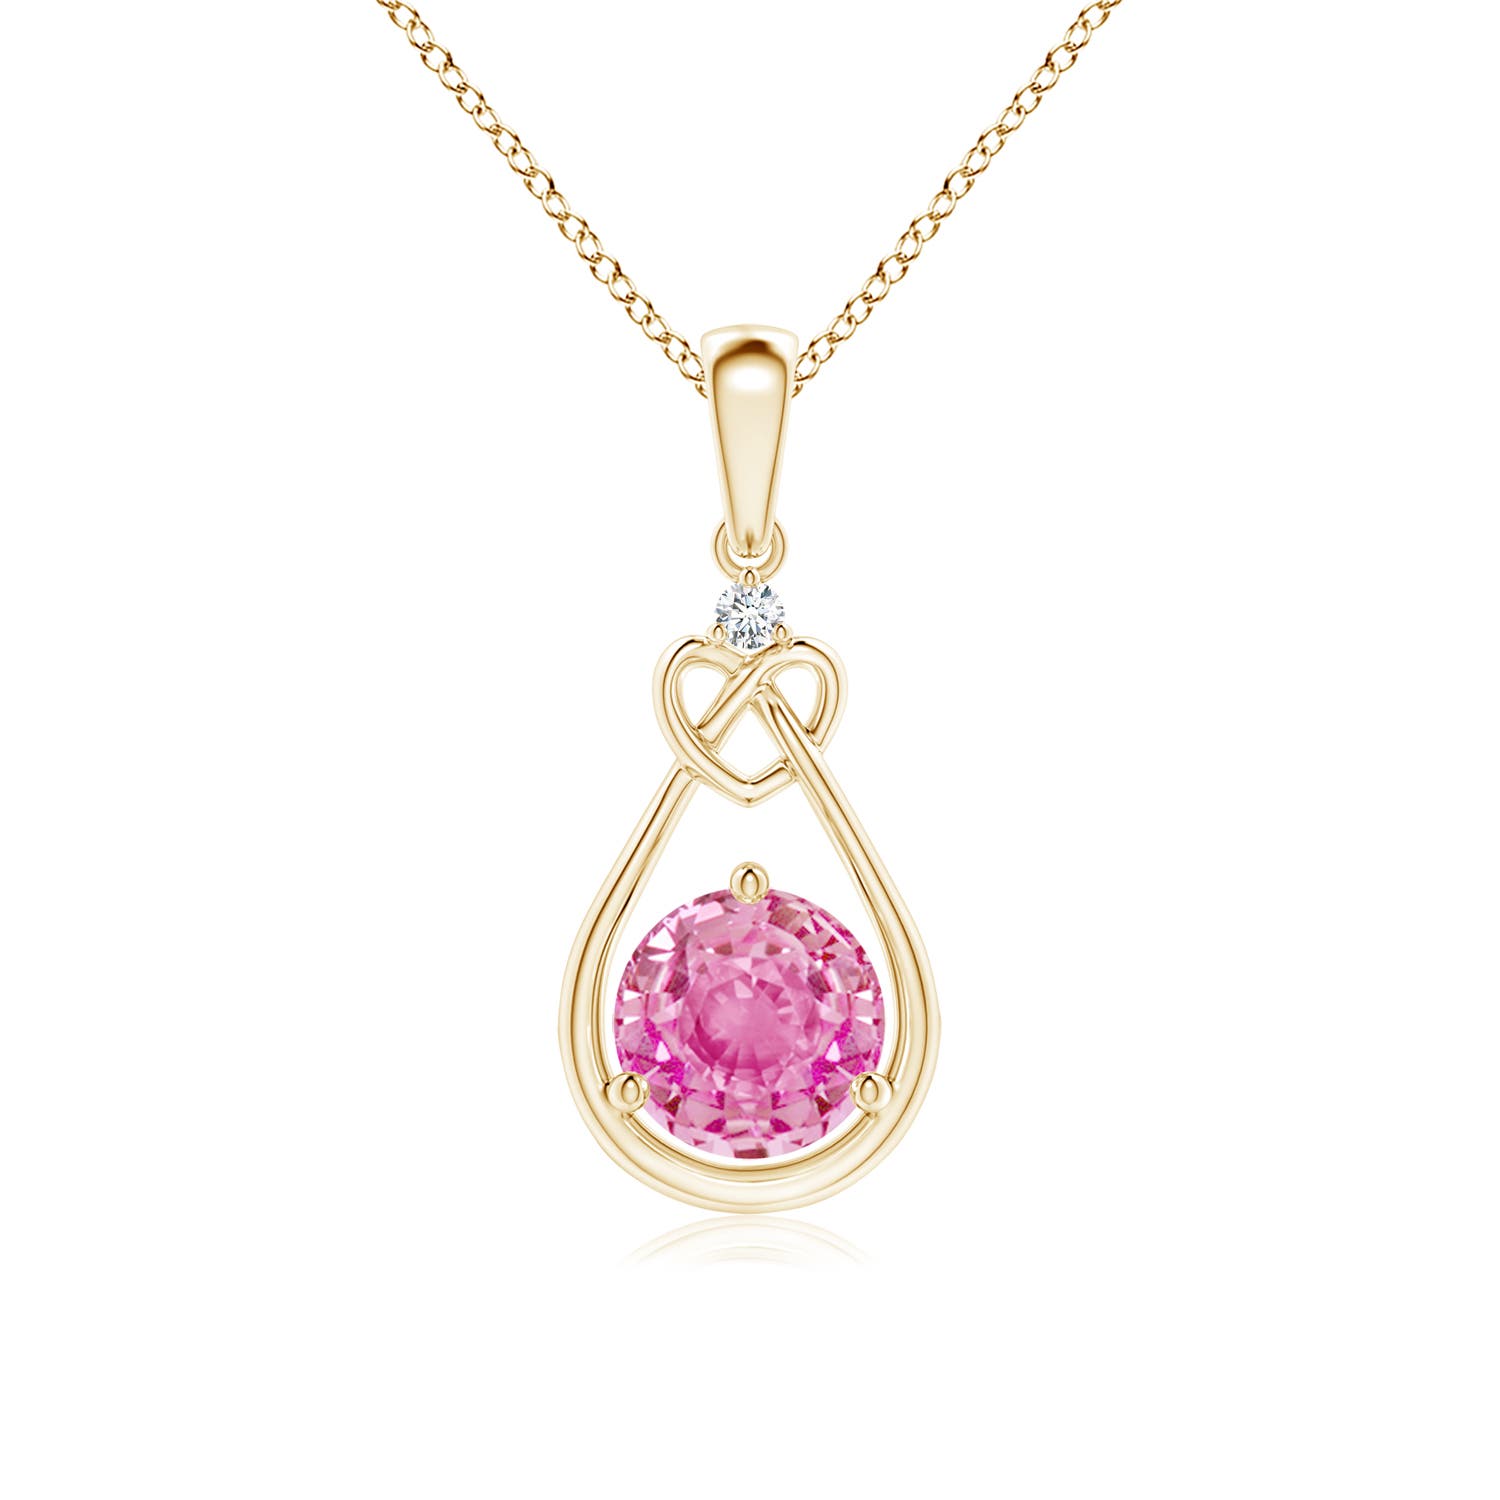 AA - Pink Sapphire / 1.01 CT / 14 KT Yellow Gold